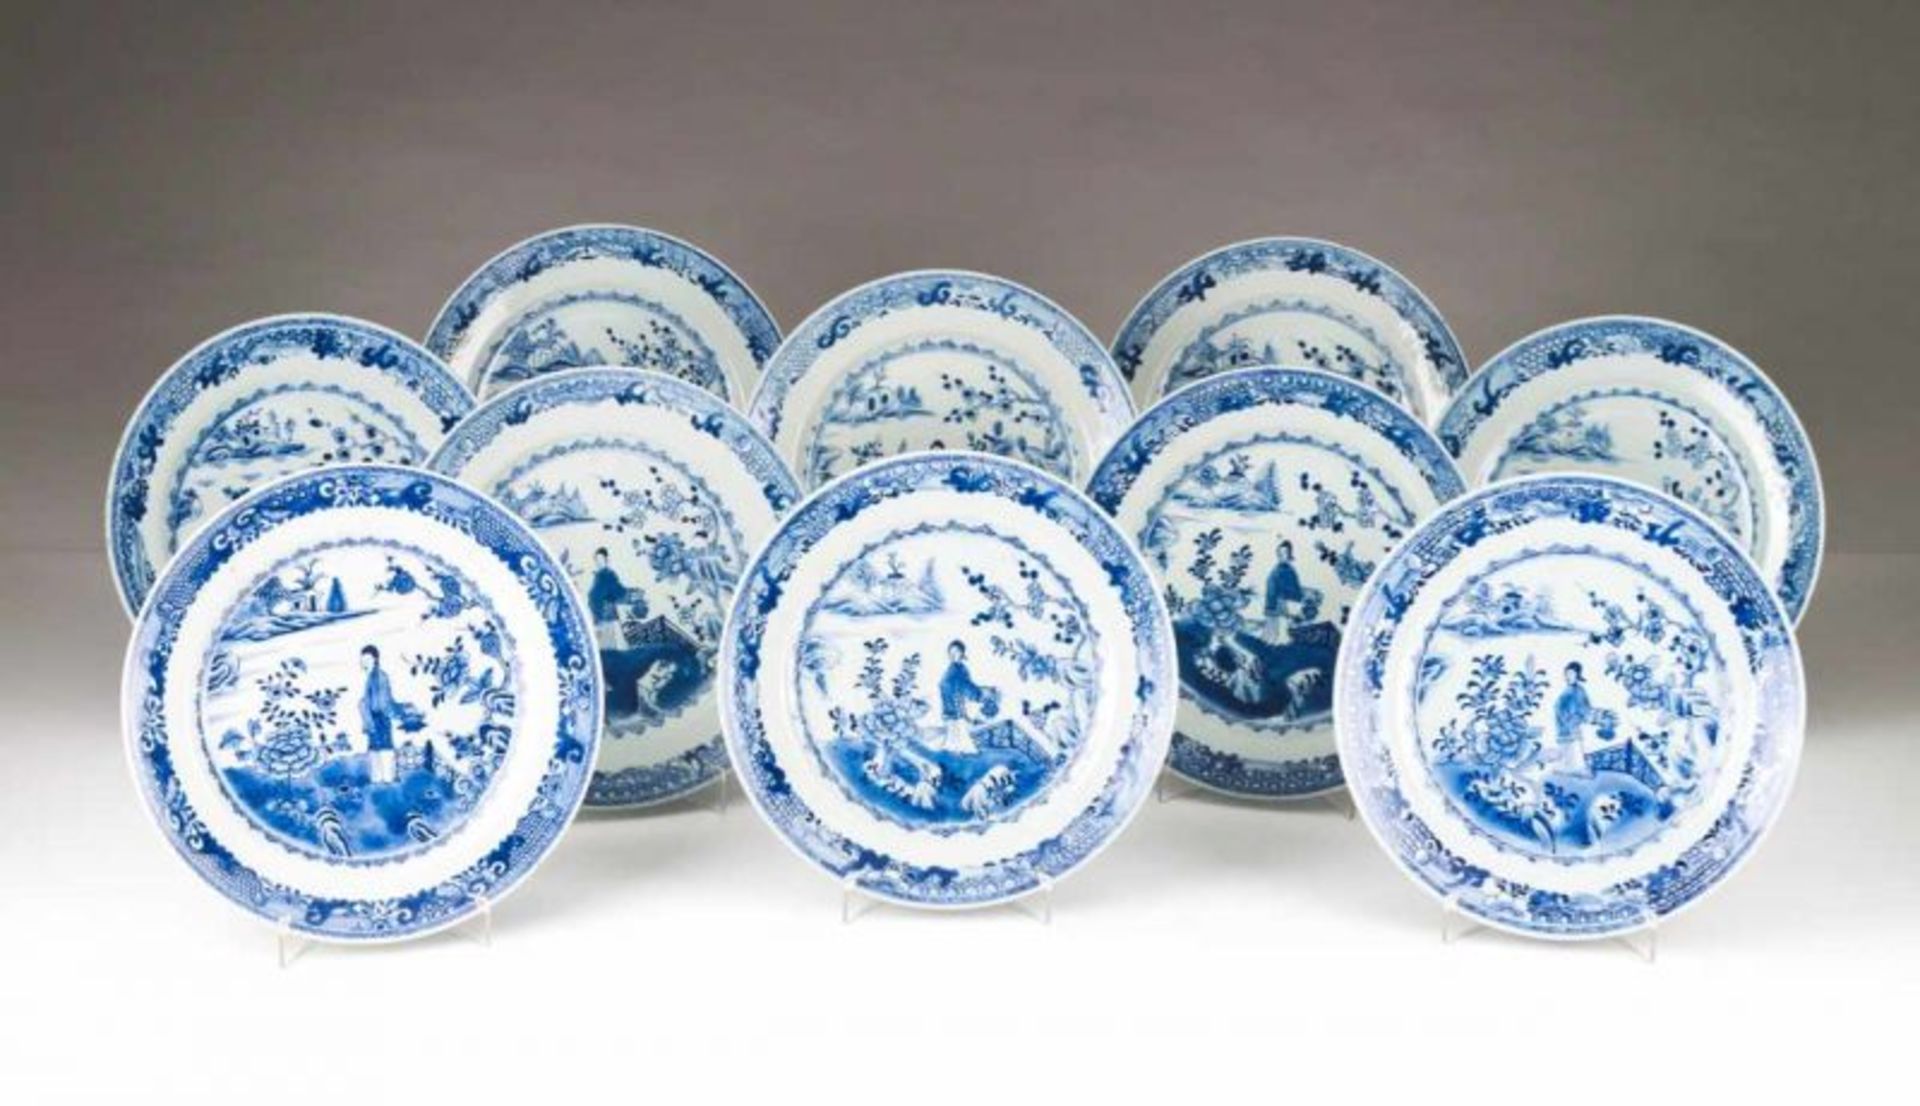 A pair of plates Chinese export porcelain Blue decoration depicting riverscape with garden and